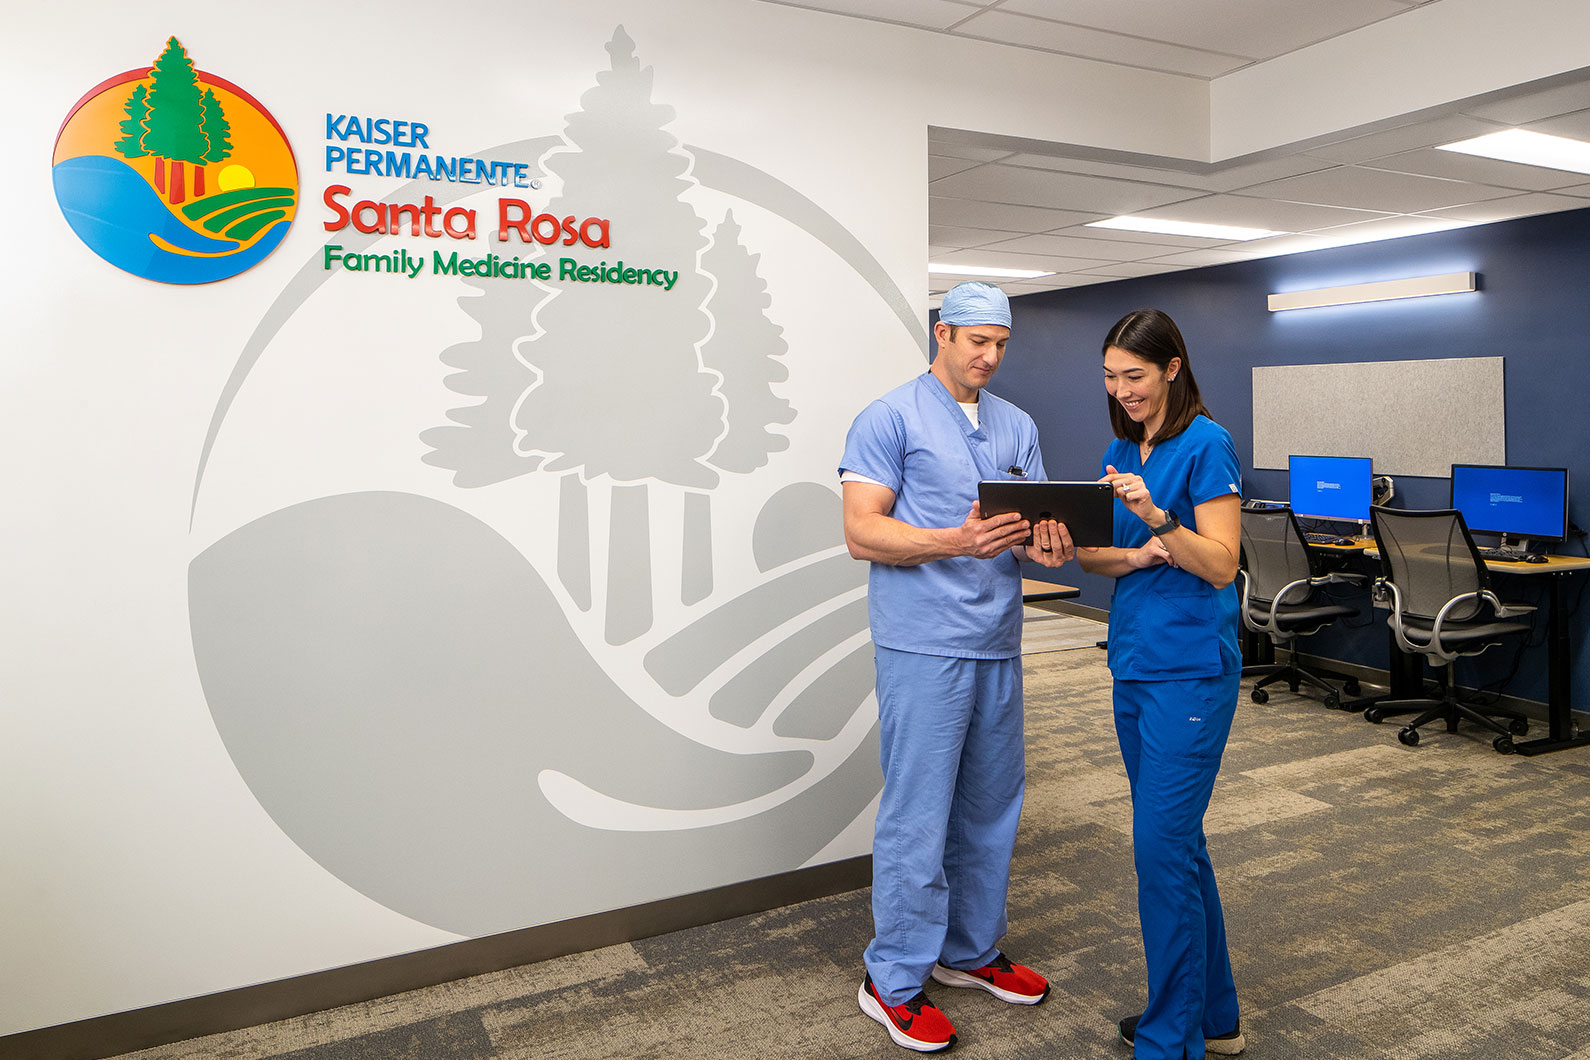 Two doctors standing next to Kaiser Permanente Santa Rosa Family Medicine Residency sign